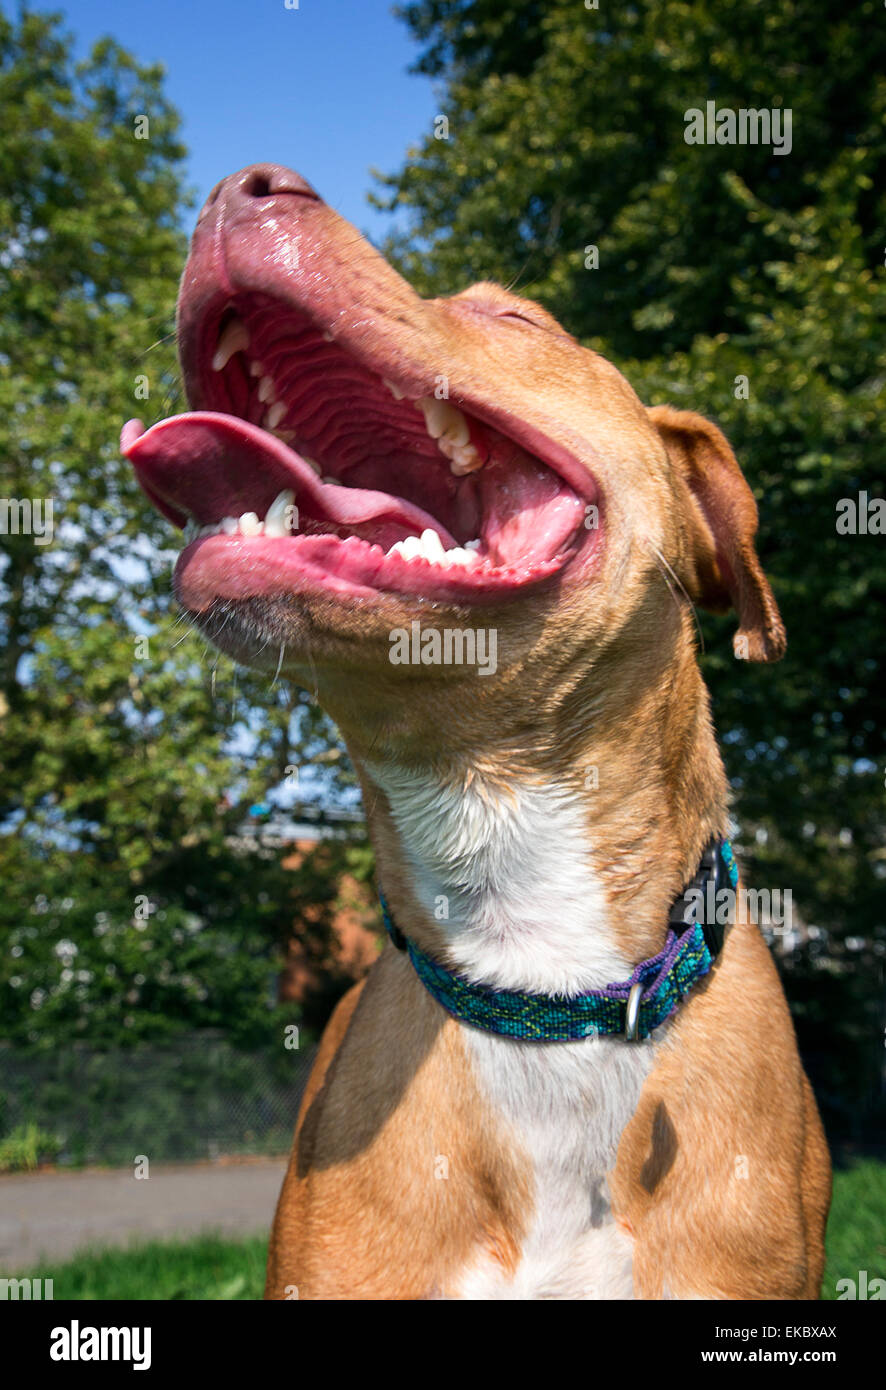 Dog panting with mouth wide open and tongue out Stock Photo